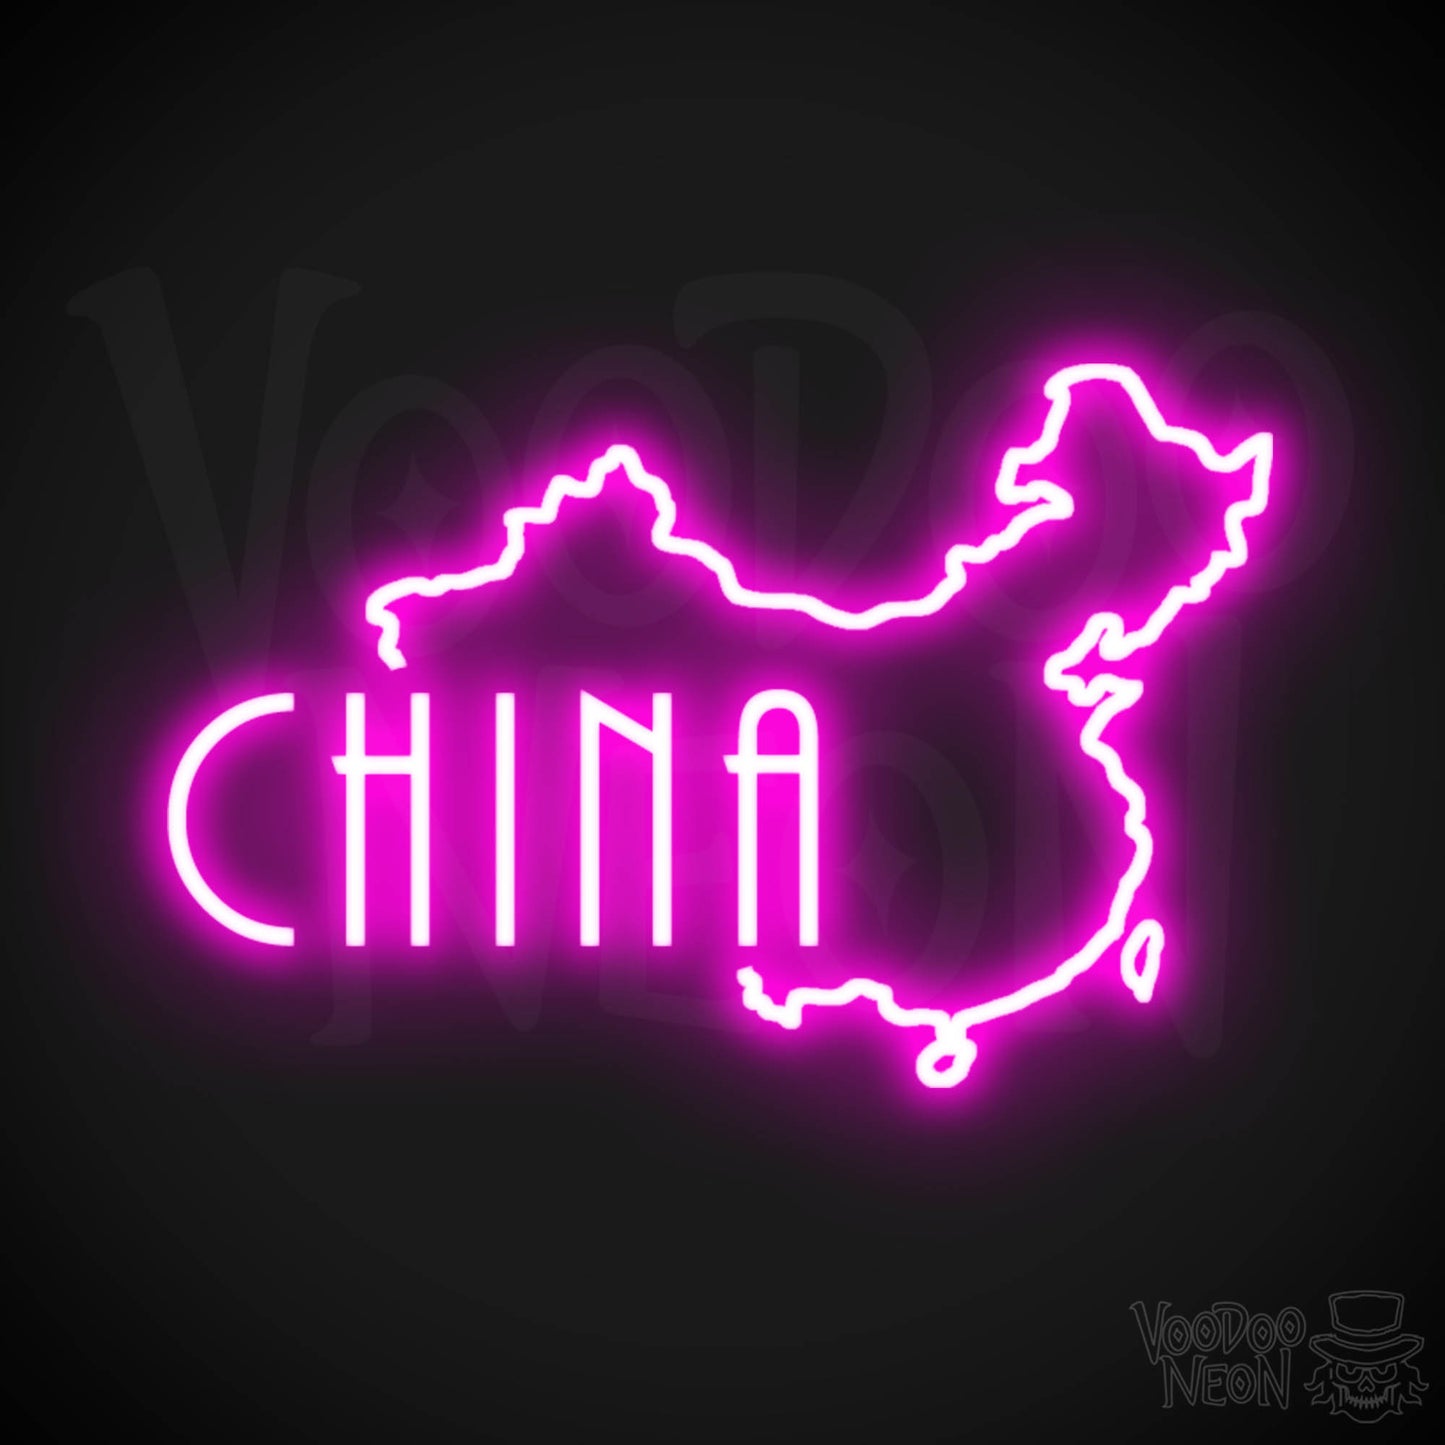 China Neon Sign - Neon China Sign - LED Sign - Color Pink